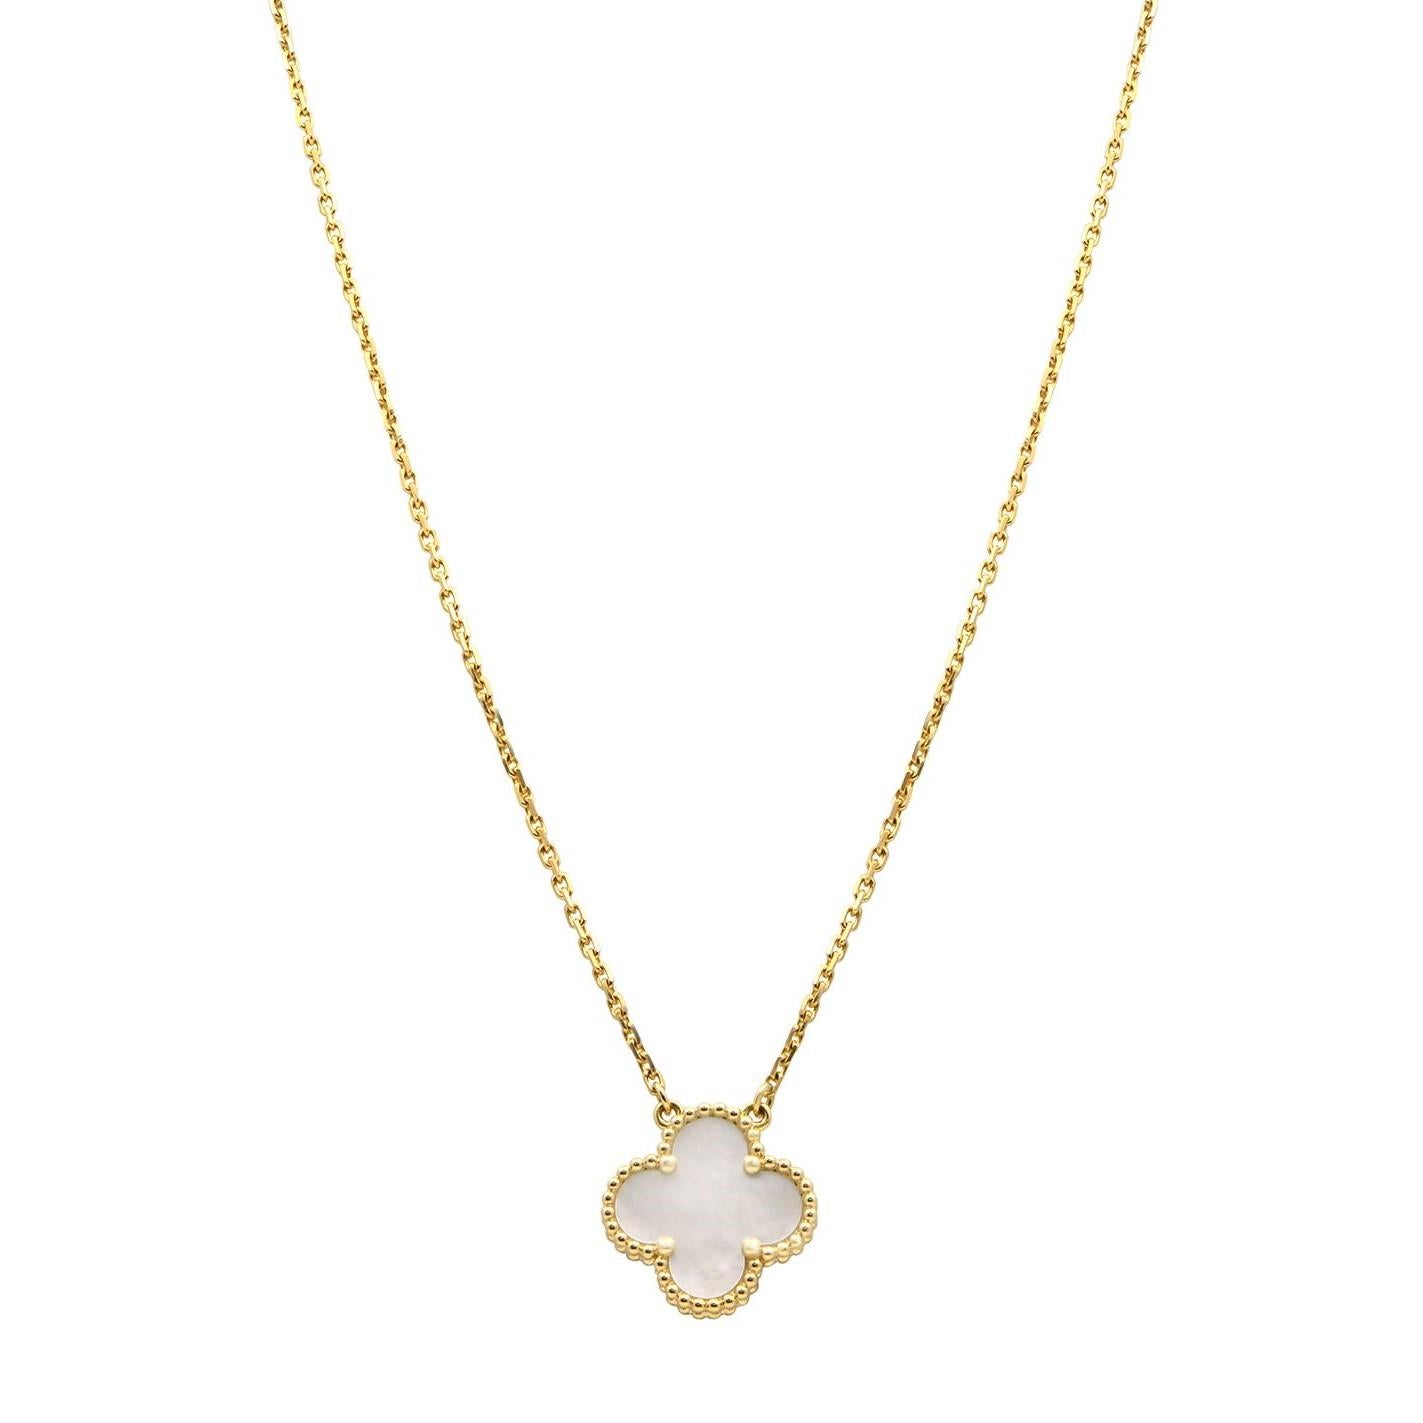 Van Cleef & Arples Vintage Alhambra pendant, 18K yellow gold, one white mother-of-pearl motif. Hallmark clasp. Chain length: 16.54 inches. Excellent pre-owned condition. Original box is not included. Comes with paperwork only. 